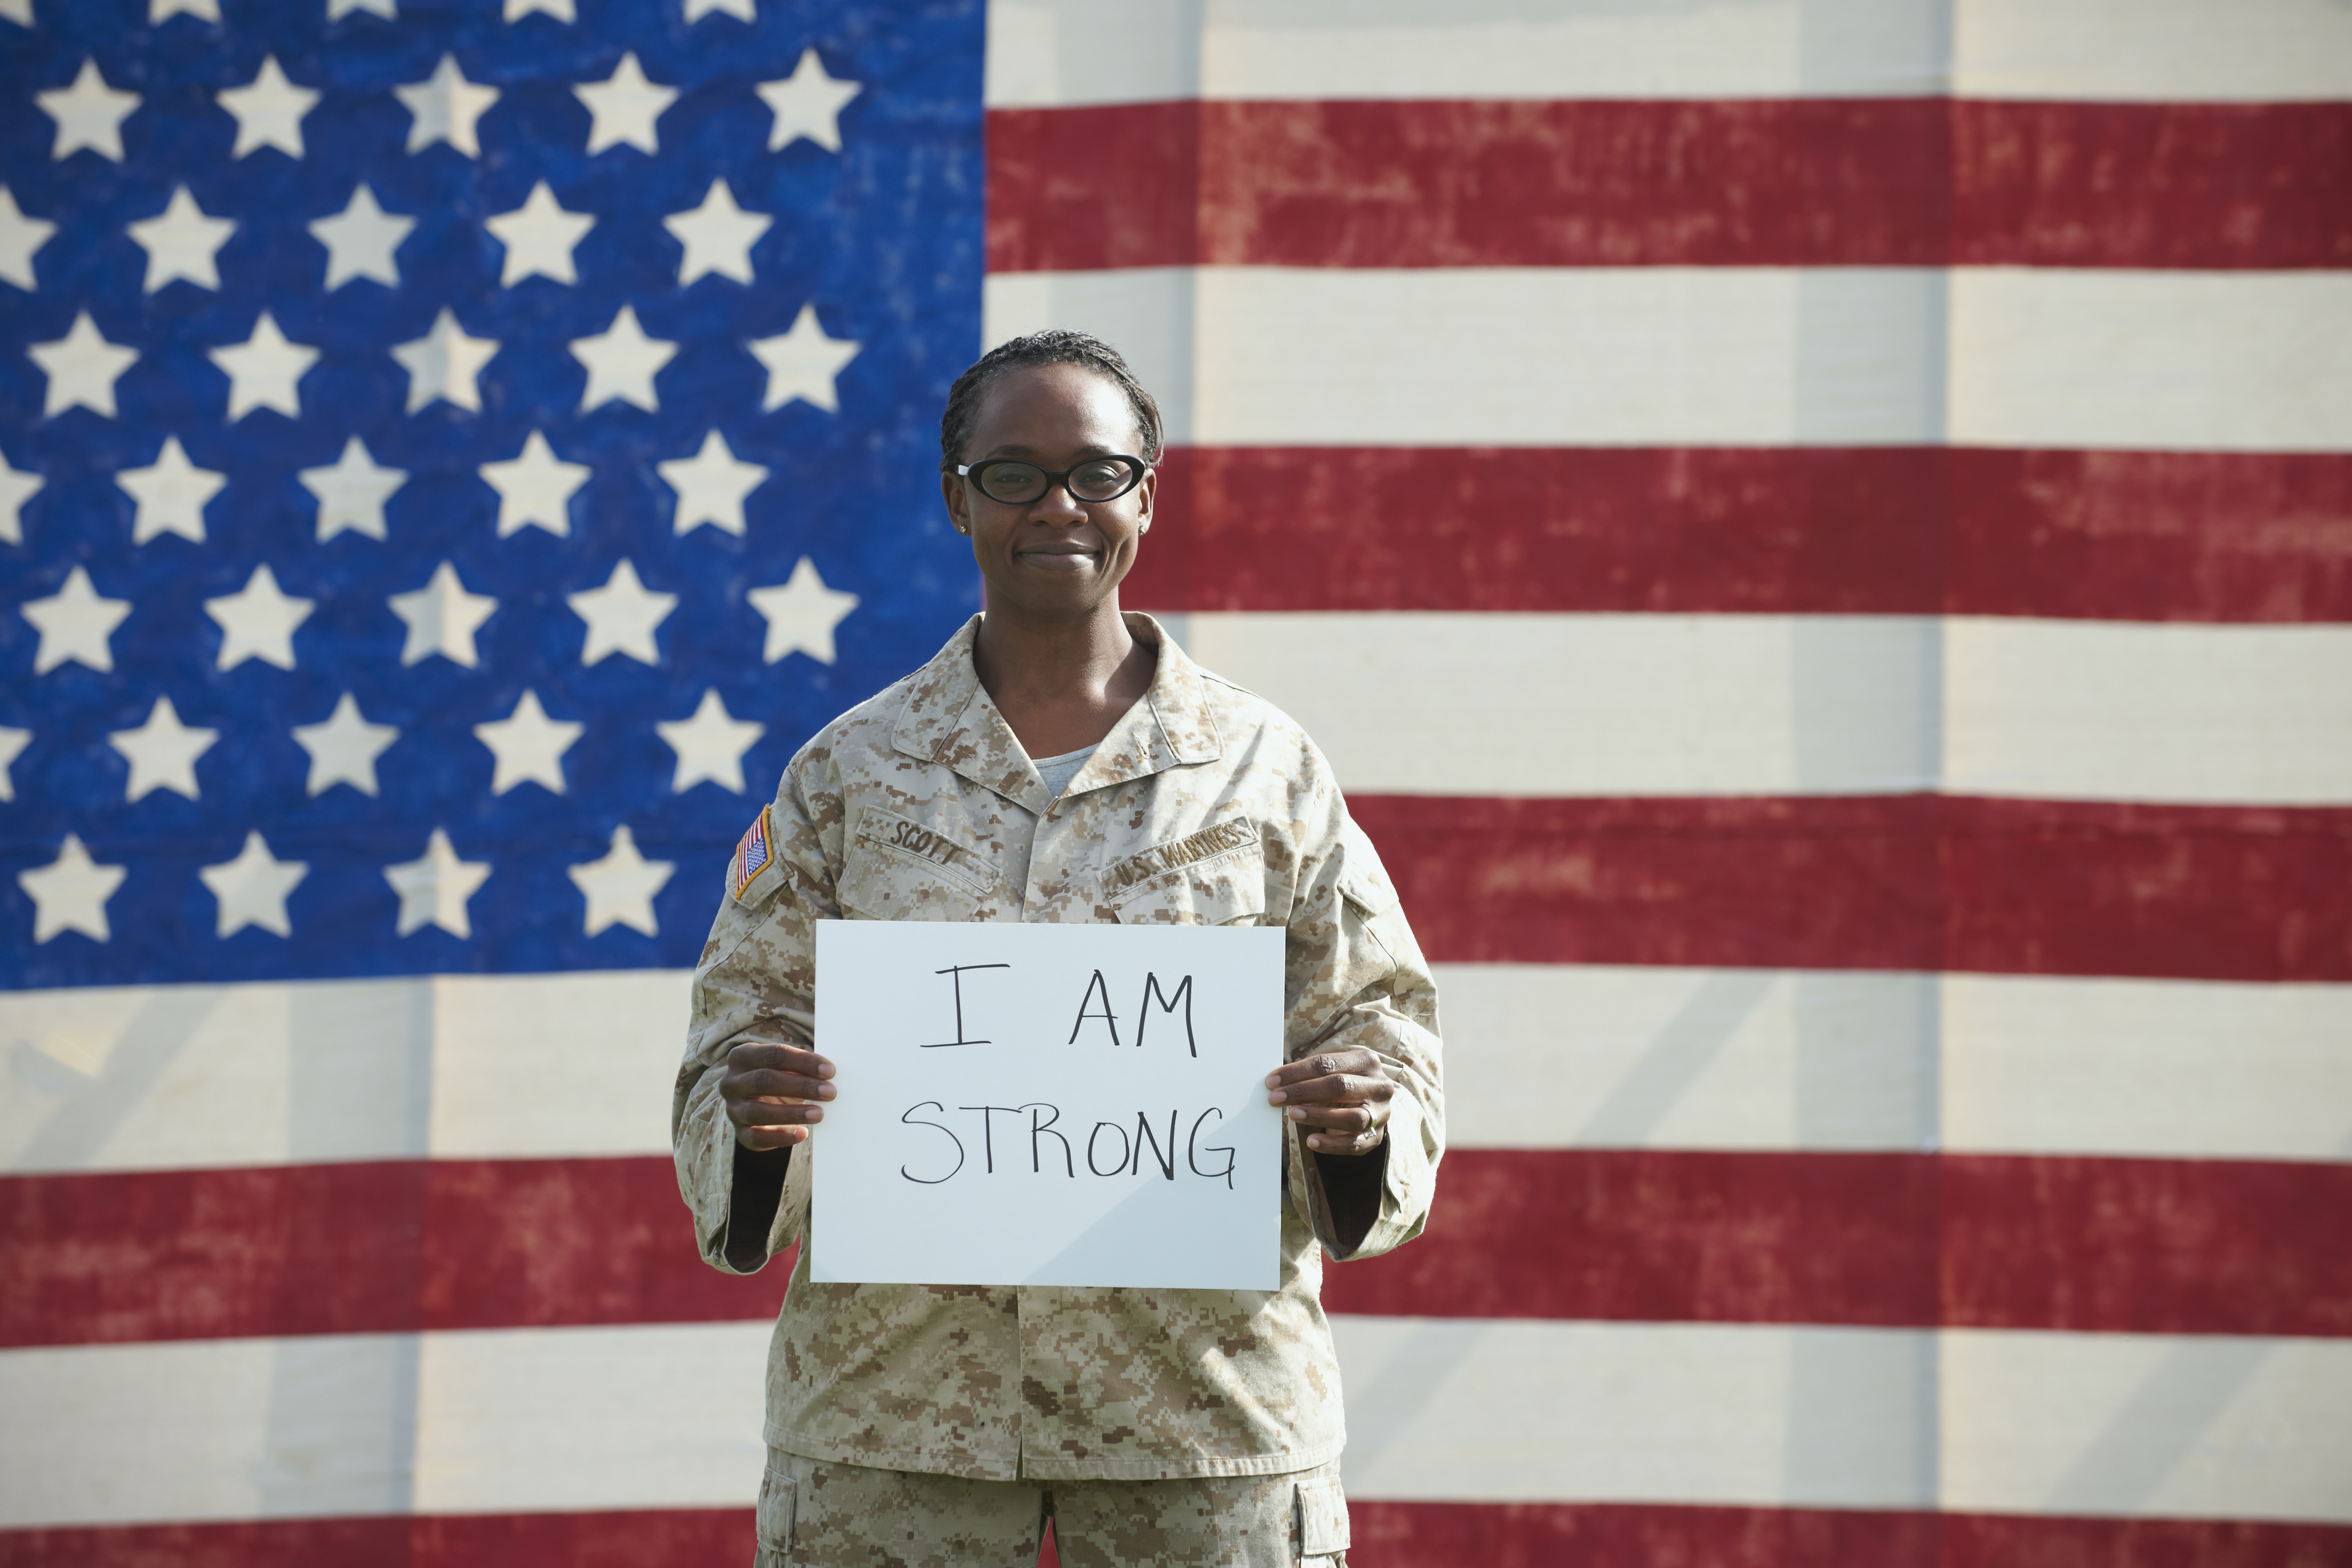 Black soldier holding I am strong sign near American flag